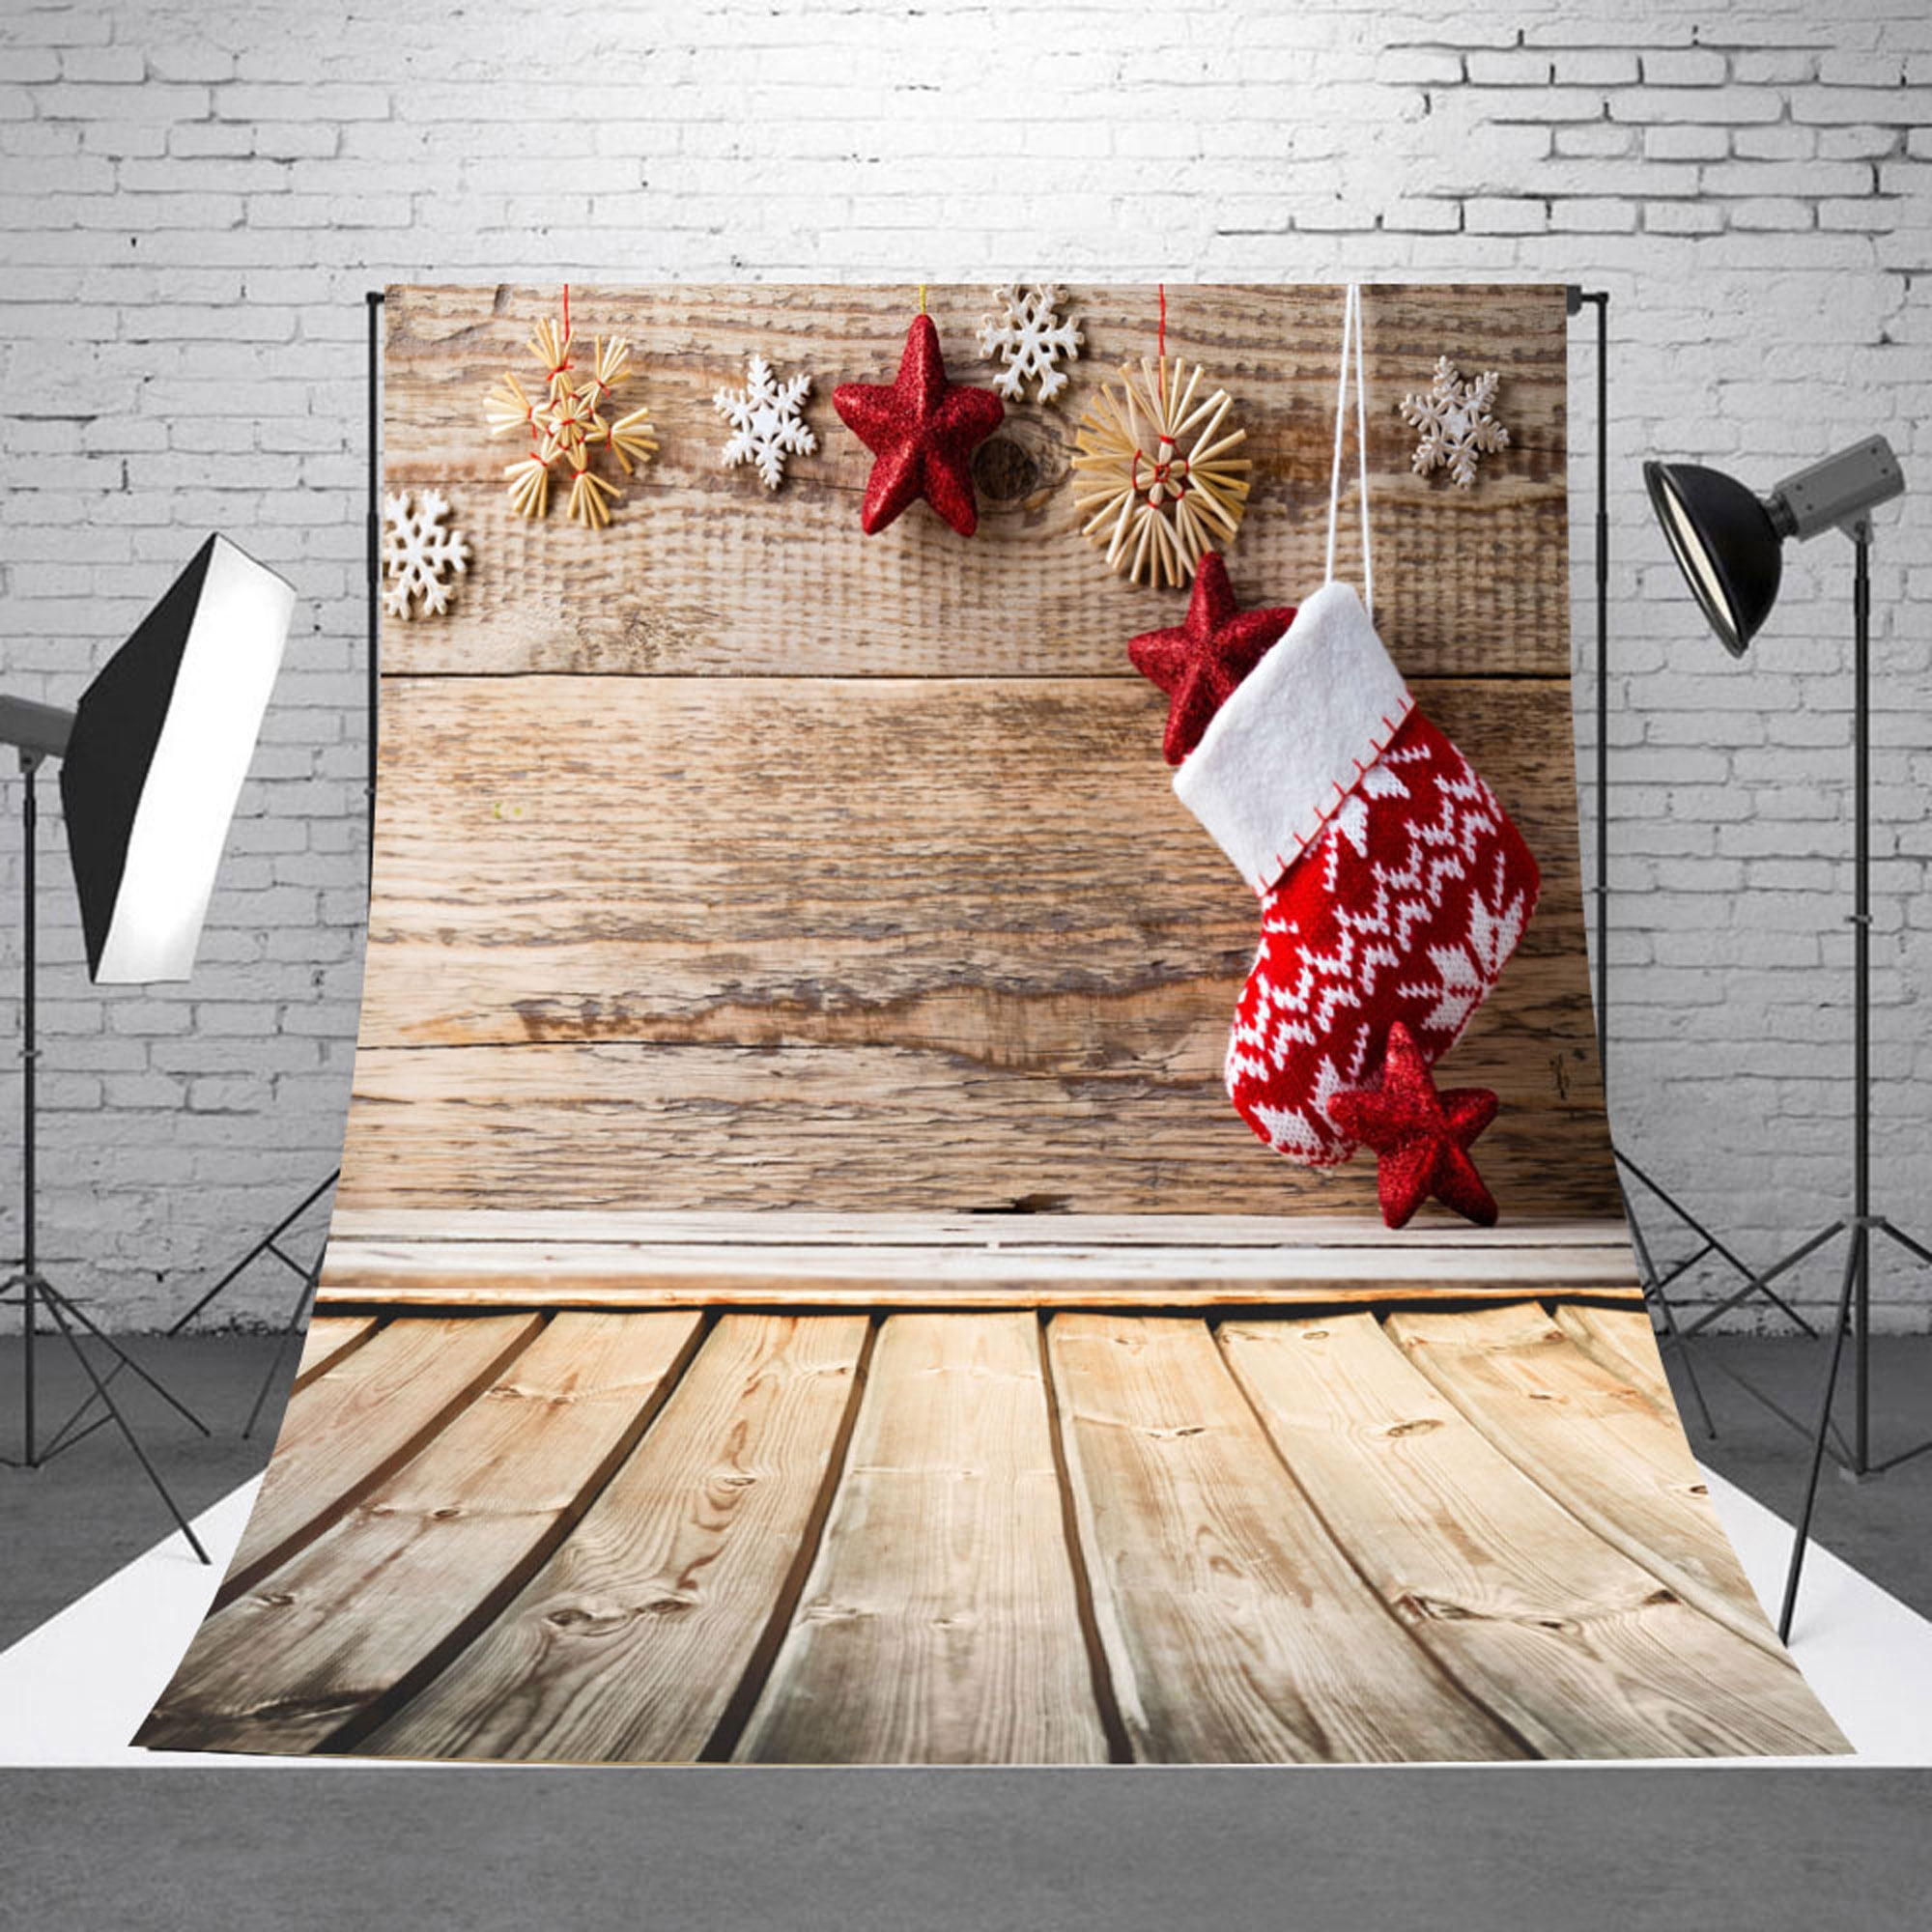 AIIKES 7x5FT Christmas Tree Backdrops Indoor Fireplace Photography Background Xmas Gifts Ball Wood Floor Photo Backdrops Party Home Decoration Photo Booth Studio Props 11-771